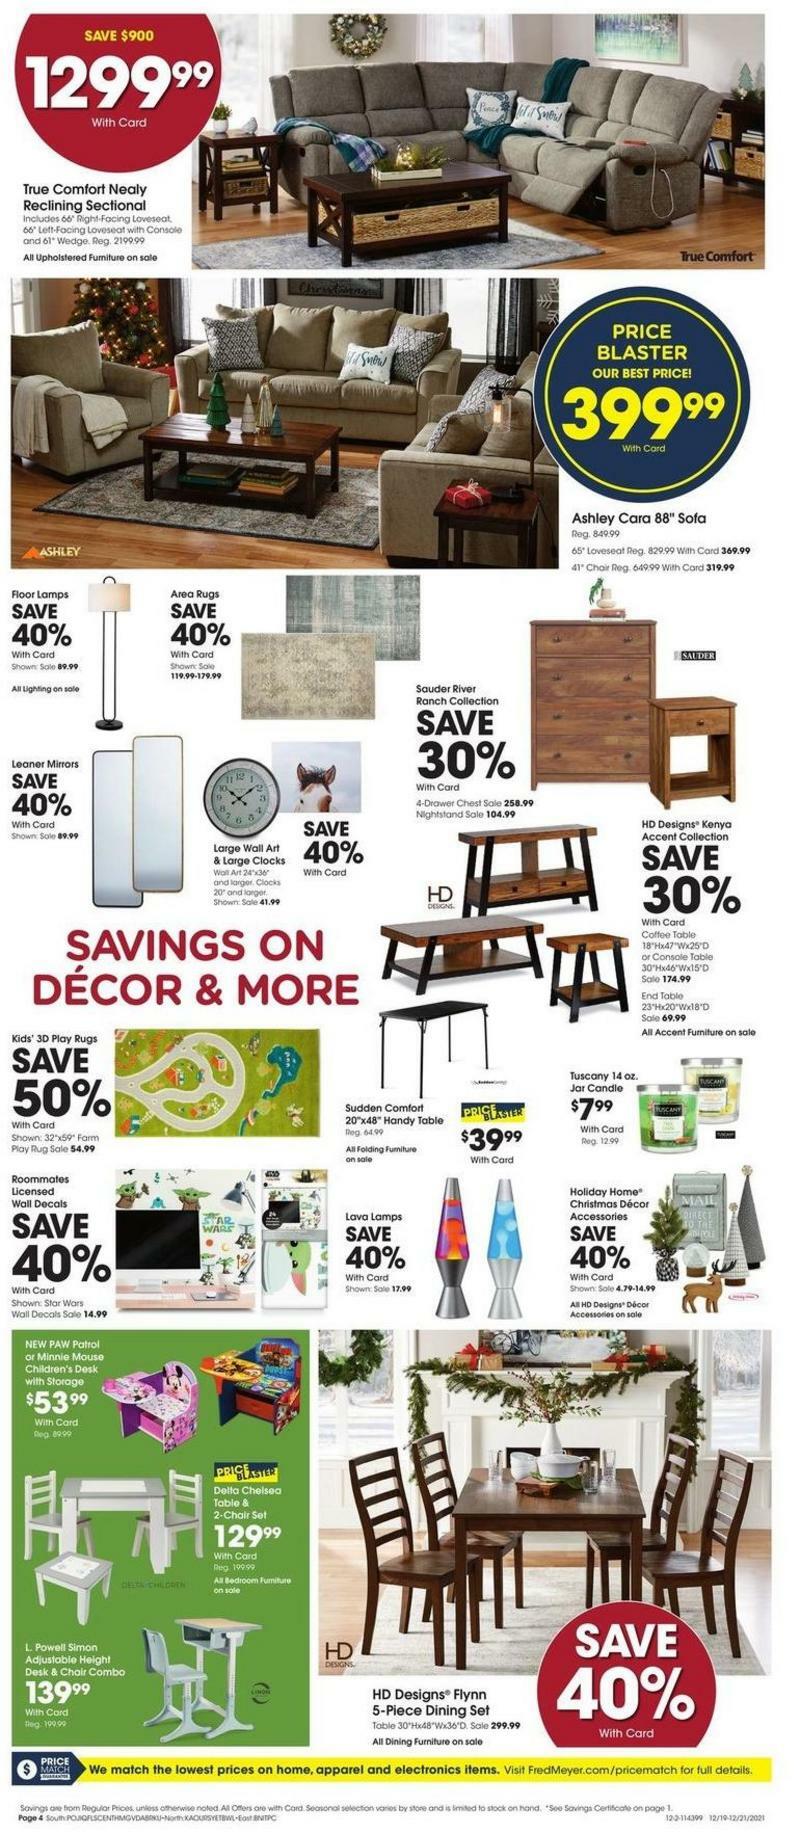 Fred Meyer 3-Day Sale Weekly Ad from December 19